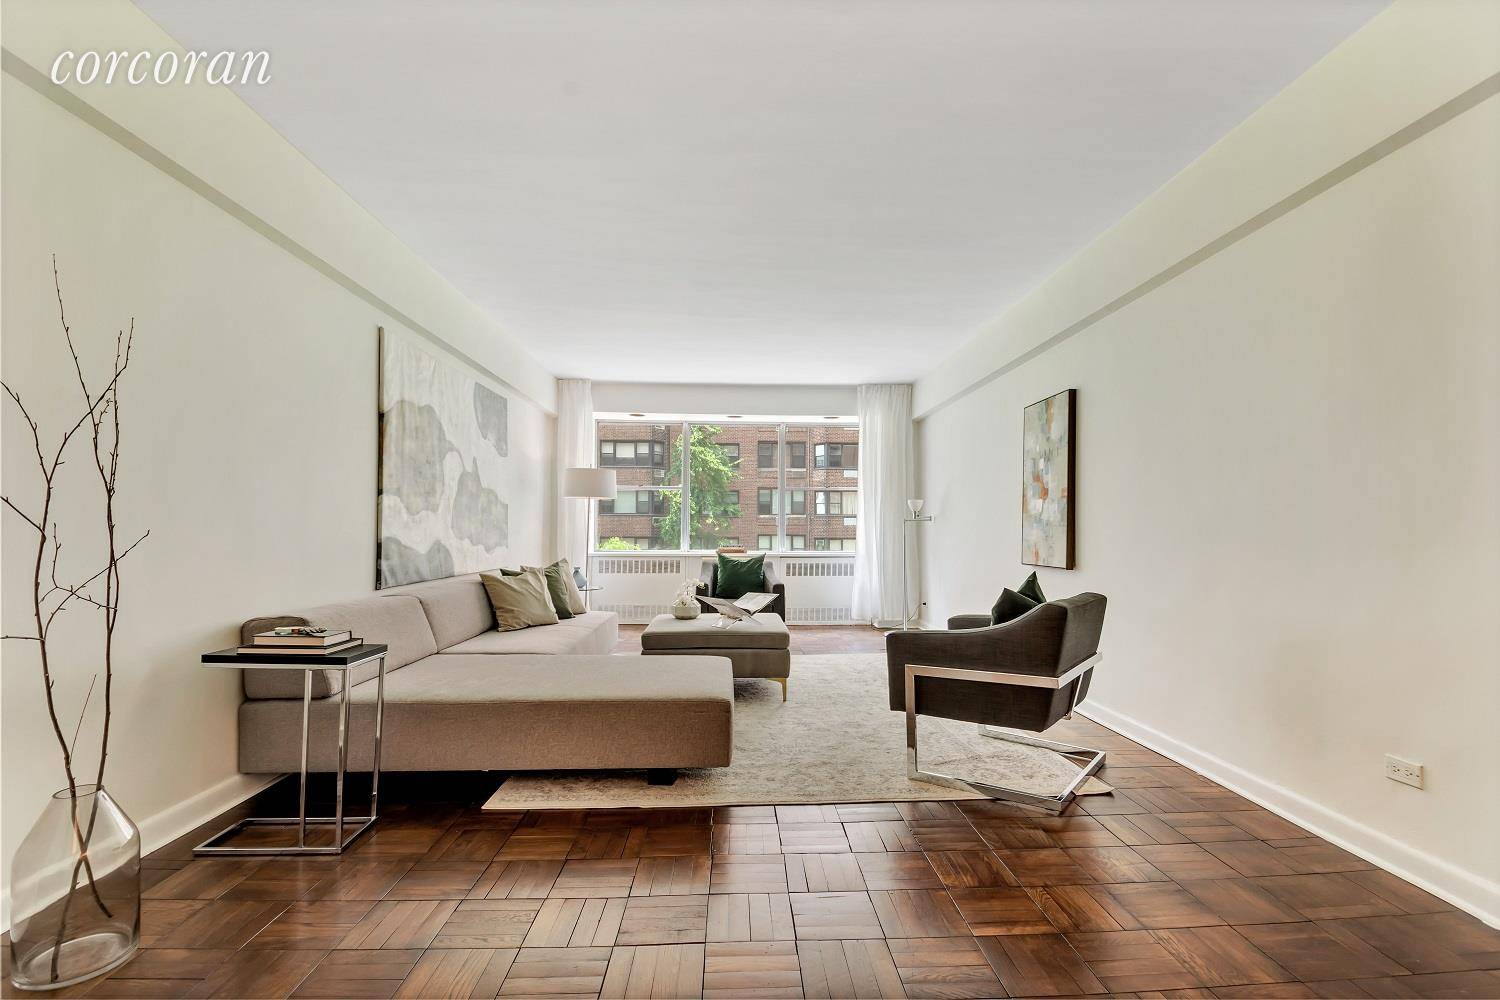 25 Sutton Place South, Apartment 4A is a classic 1 Bedroom with full bath and powder room in the grand, spacious style of Manhattans mid century homes paired with an ...